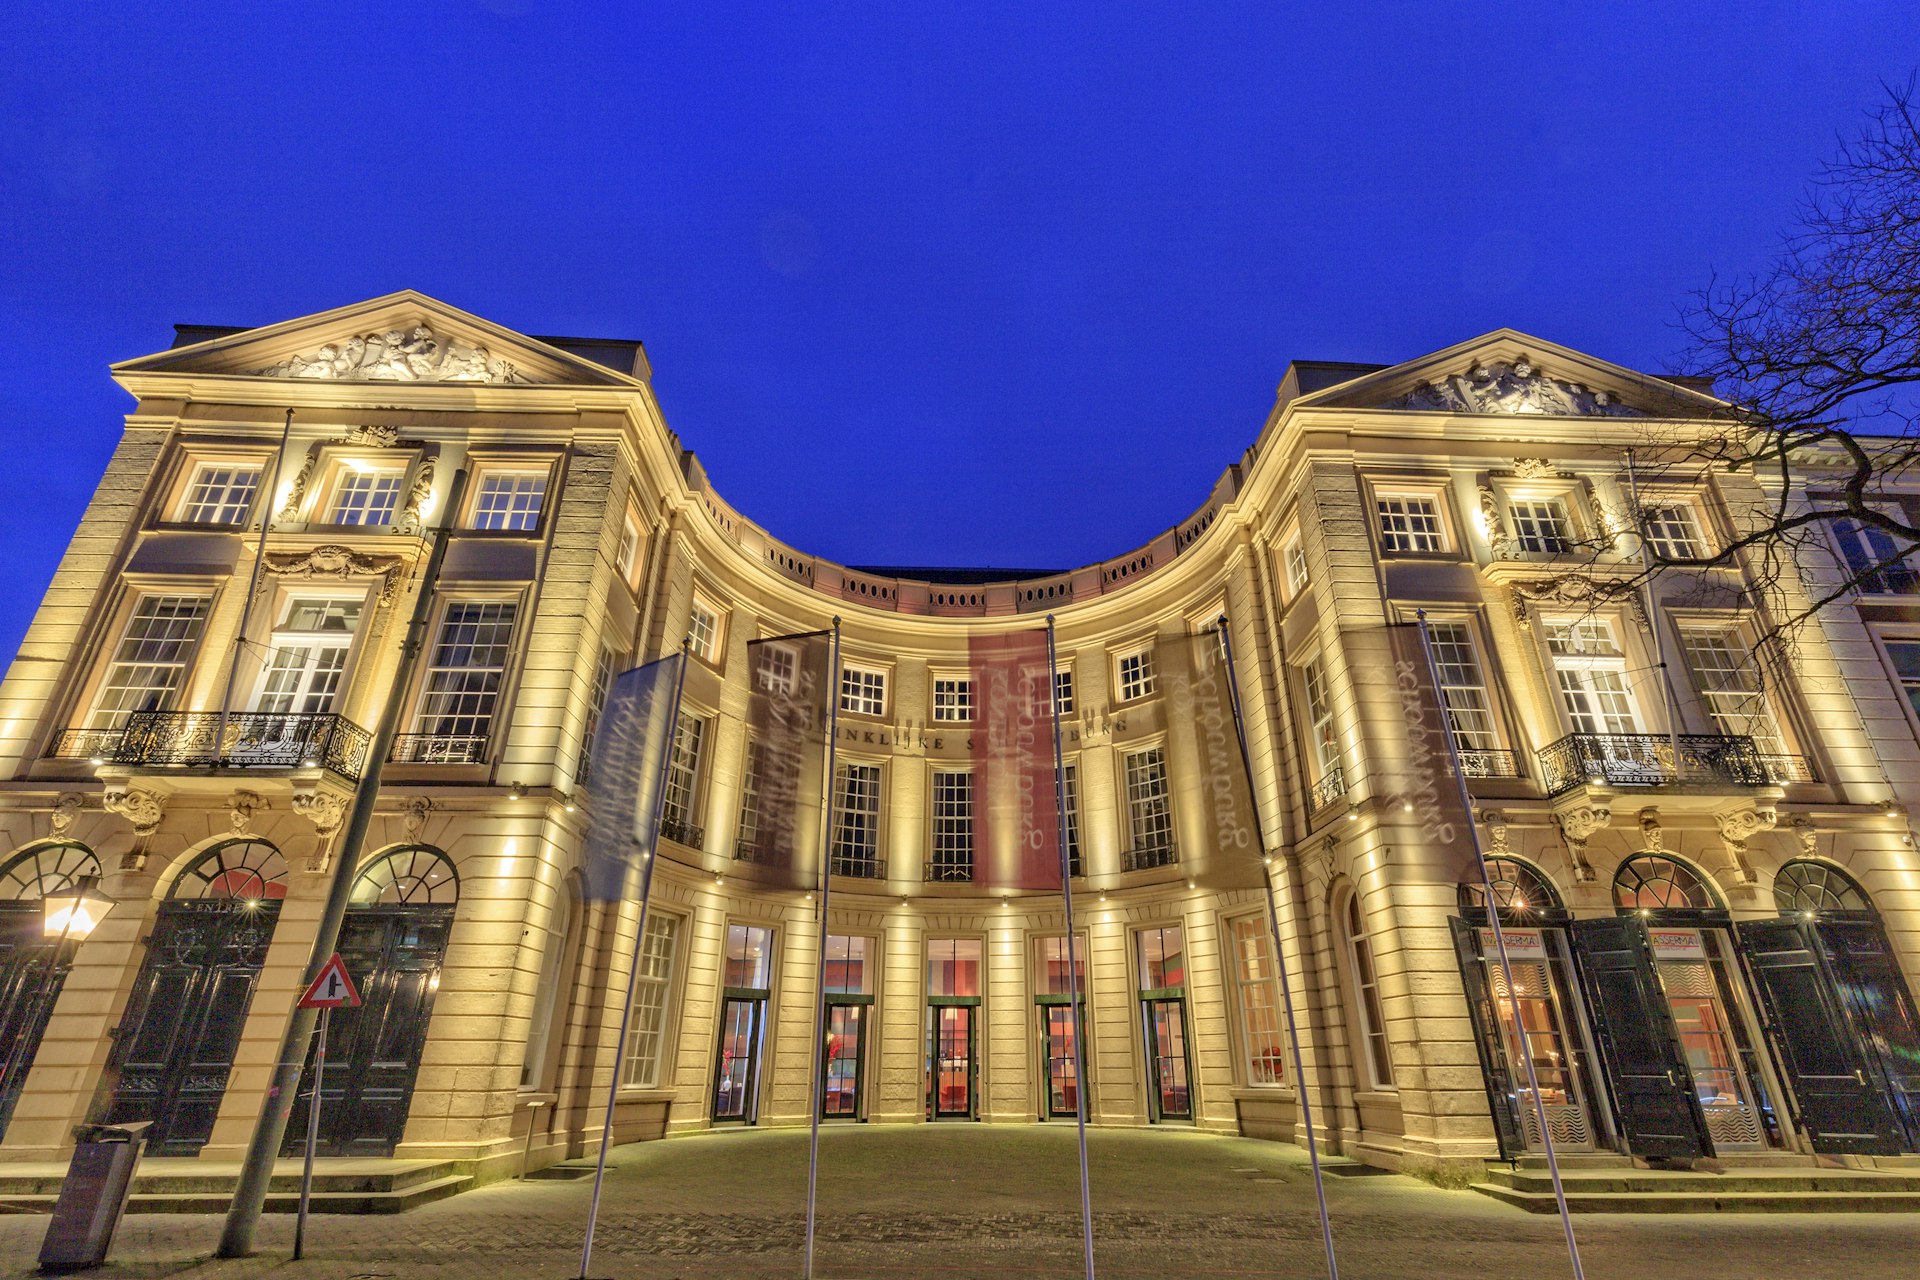 Features - exterior of The Hague's Royal Theatre